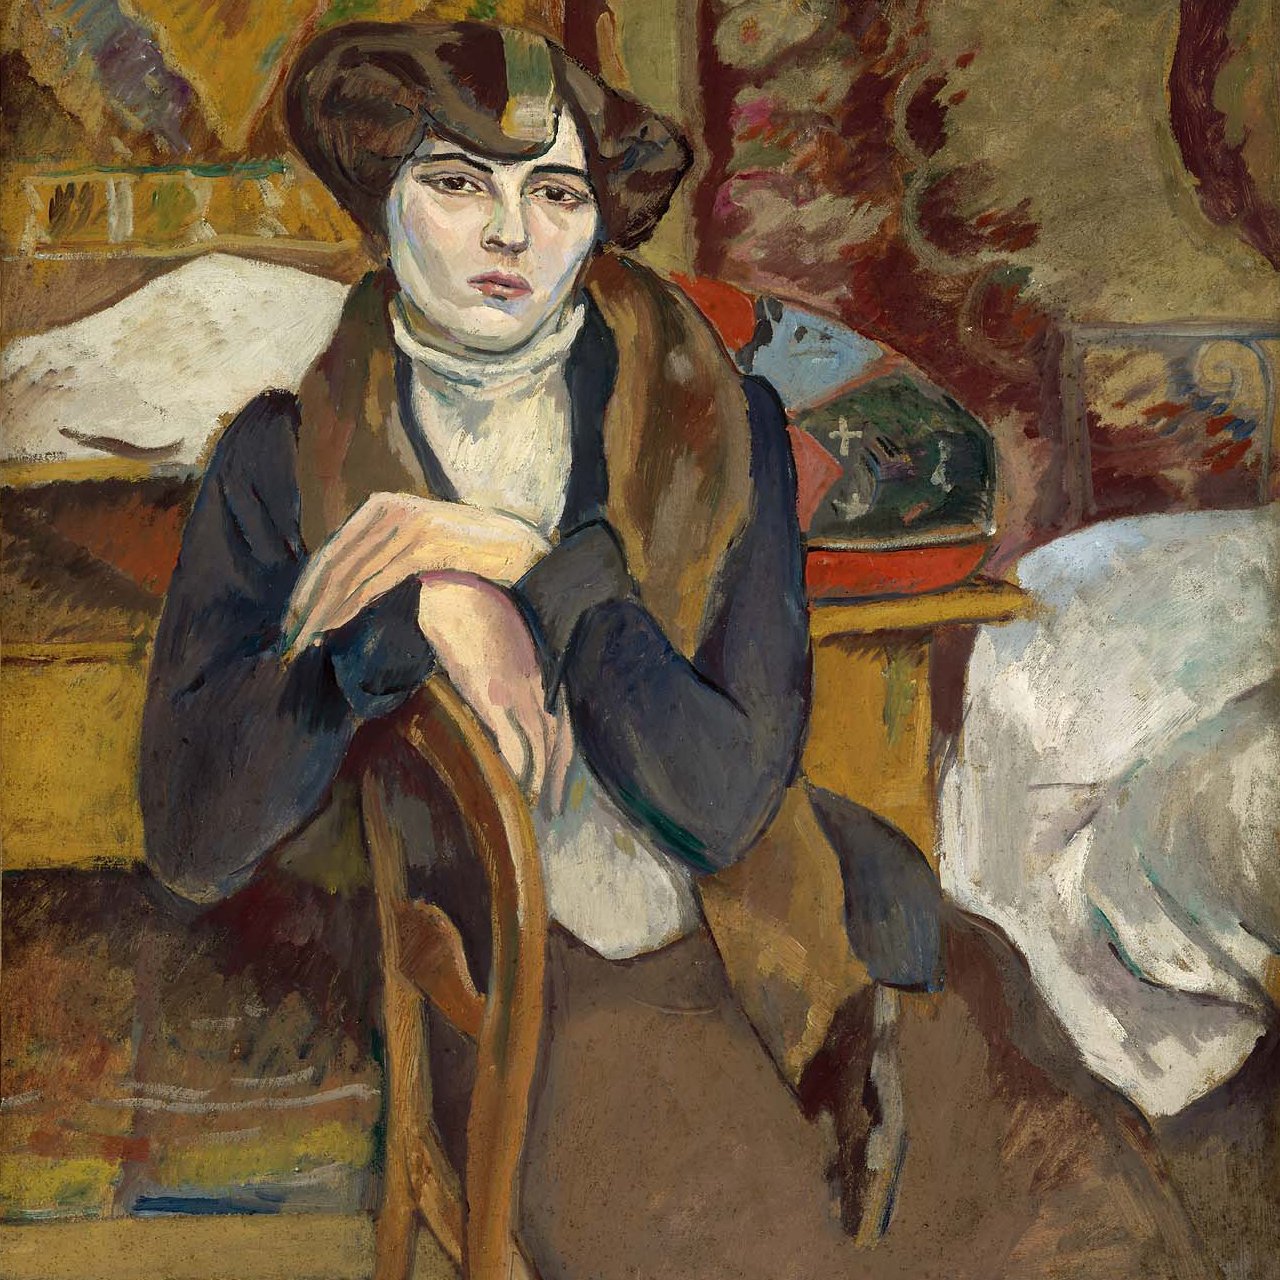 How did Jews shape Parisian arts and culture in the 1800s &amp; beyond? 🇫🇷 Find out in our new in-person &amp; online series, From Dreyfus to Vichy: Parisian Jewish Arts and Culture in Turbulent Times, which kicks off next month. 

🗓️3 Jun-1 Jul
j